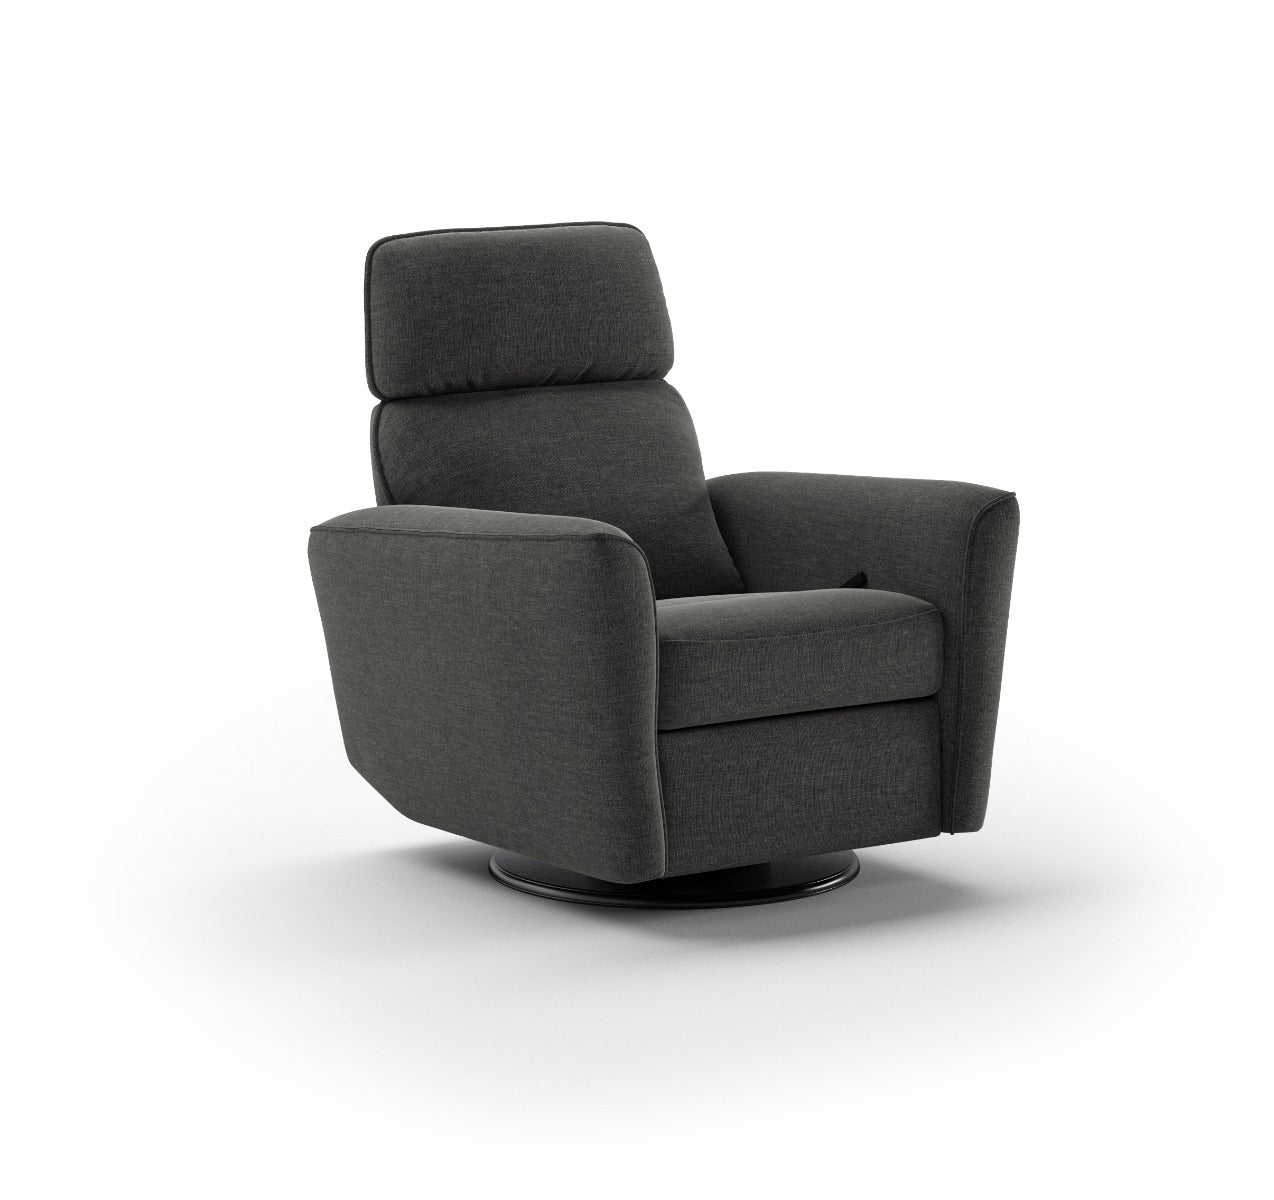 Luonto Furniture Welted Recliner - Manual - Oliver 515